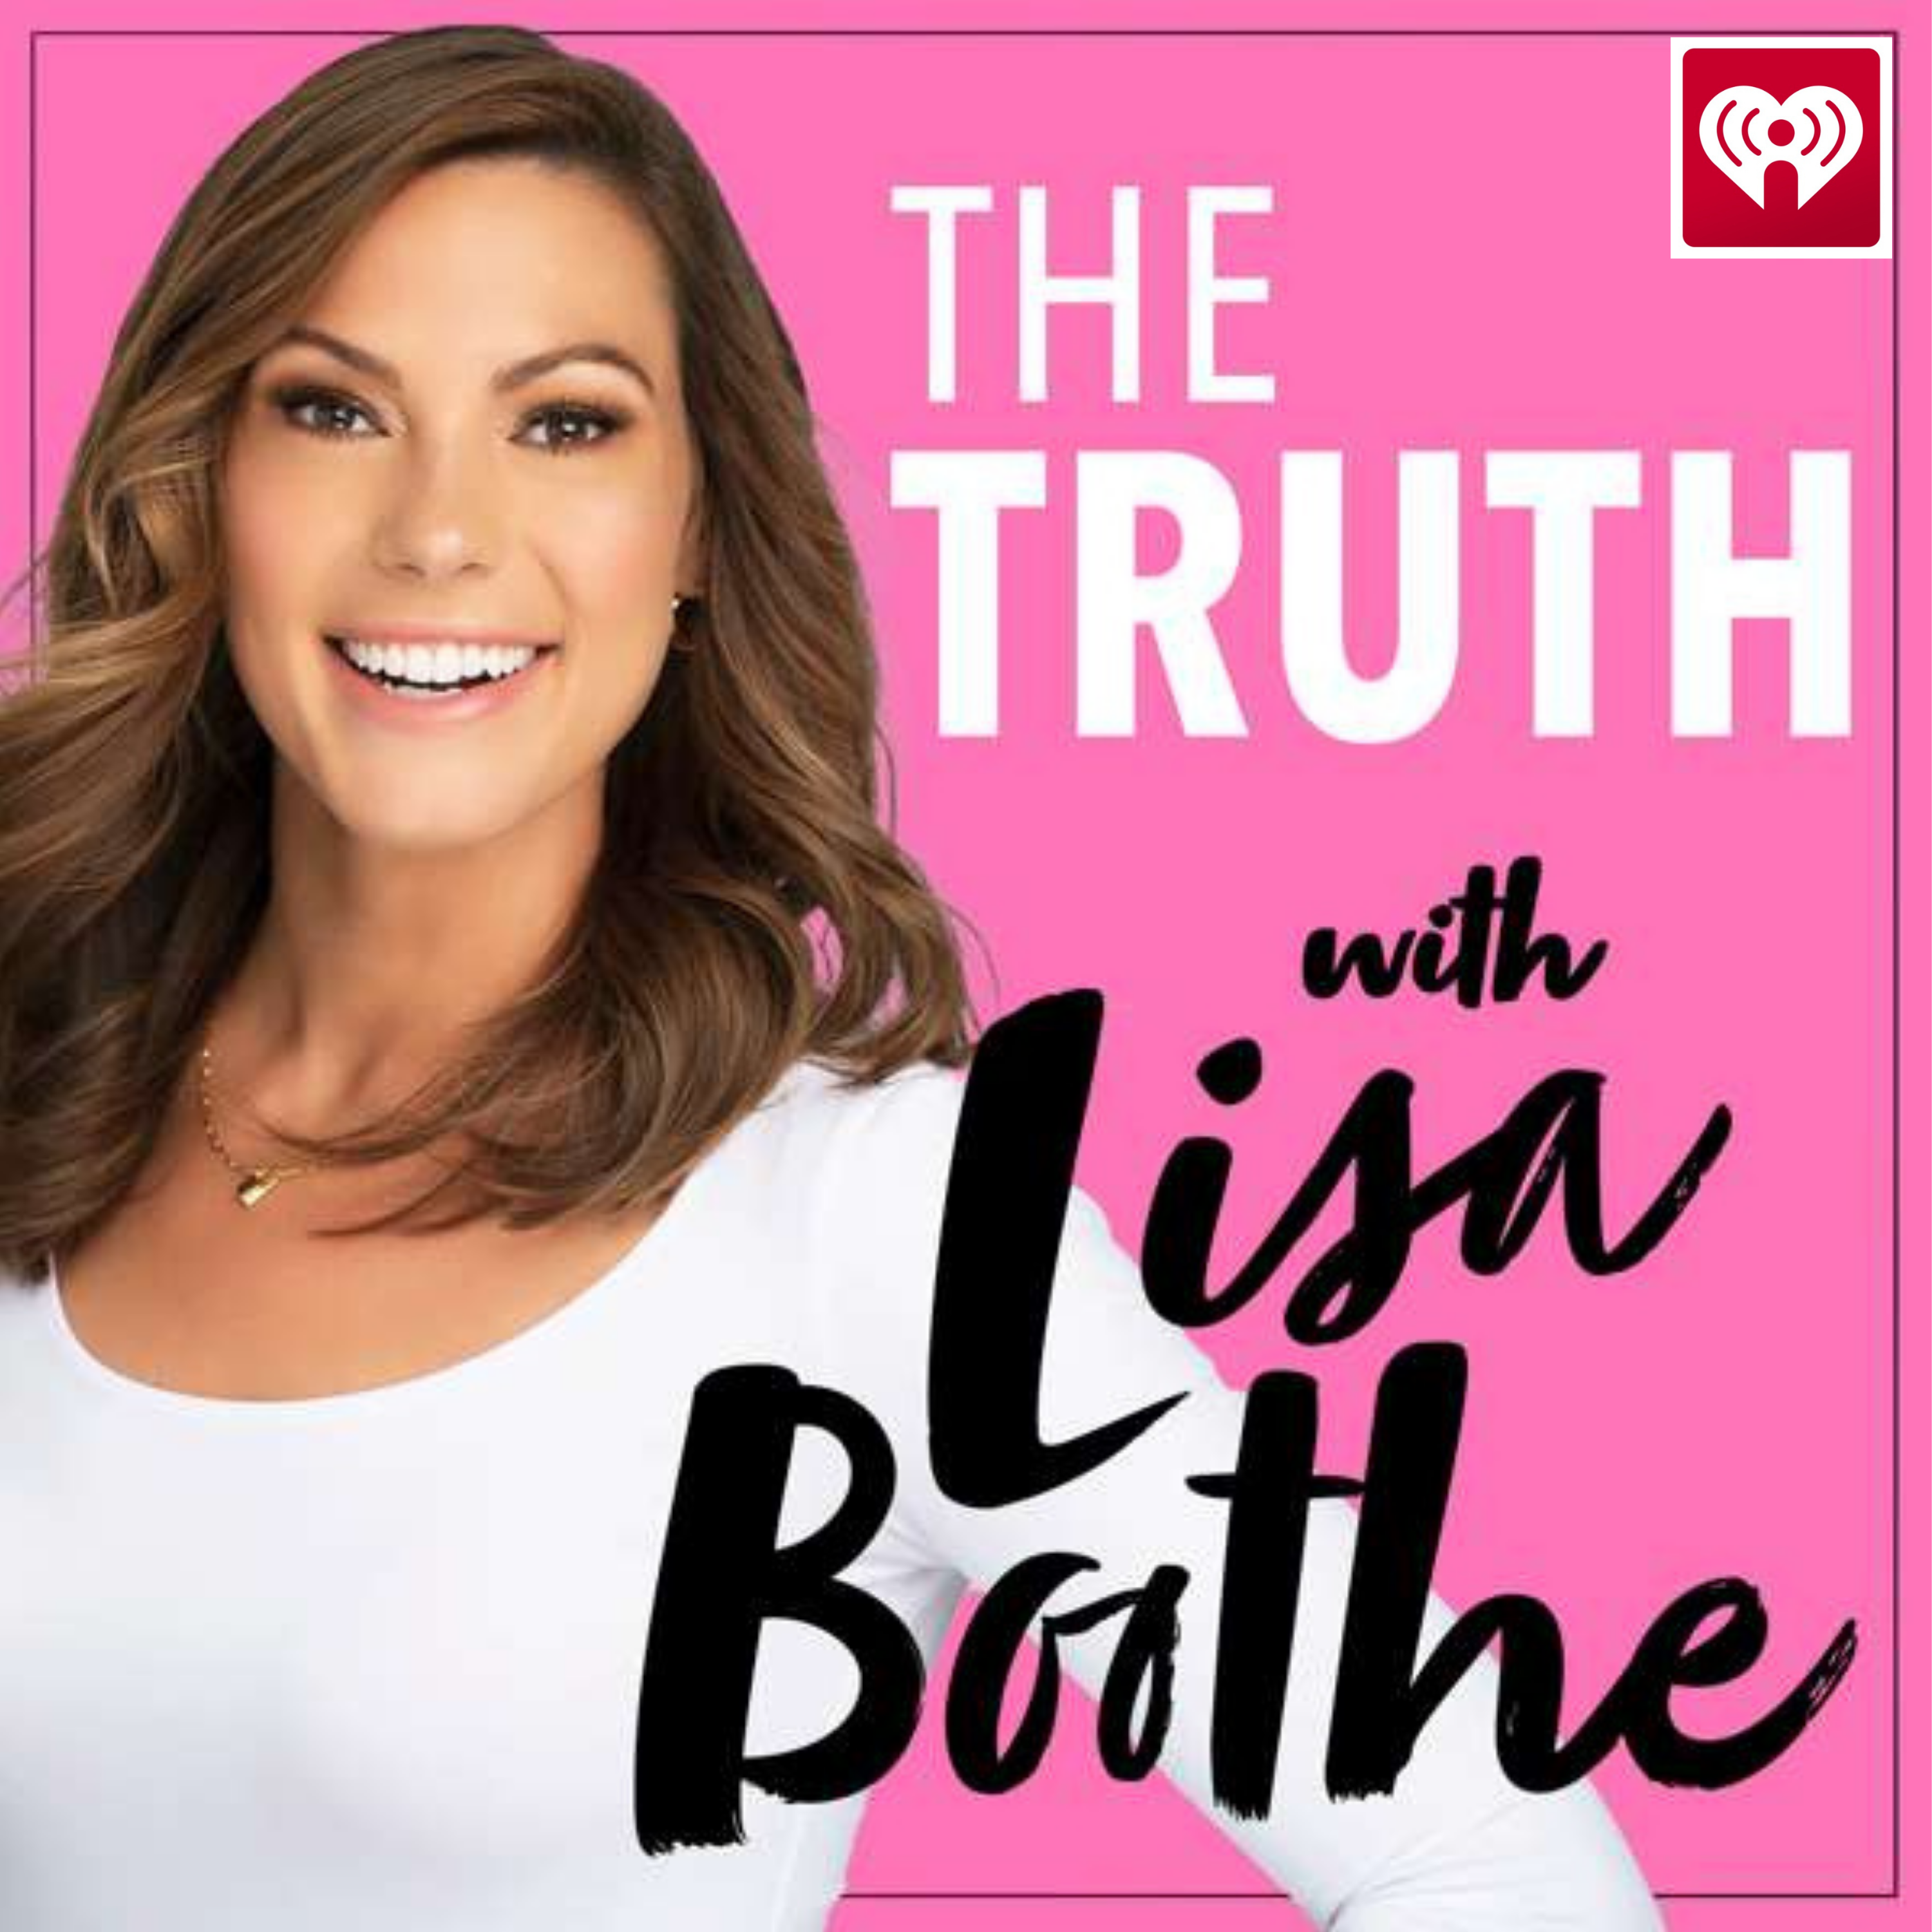 The Truth with Lisa Boothe: The Real Life Purge with Heather Mac Donald